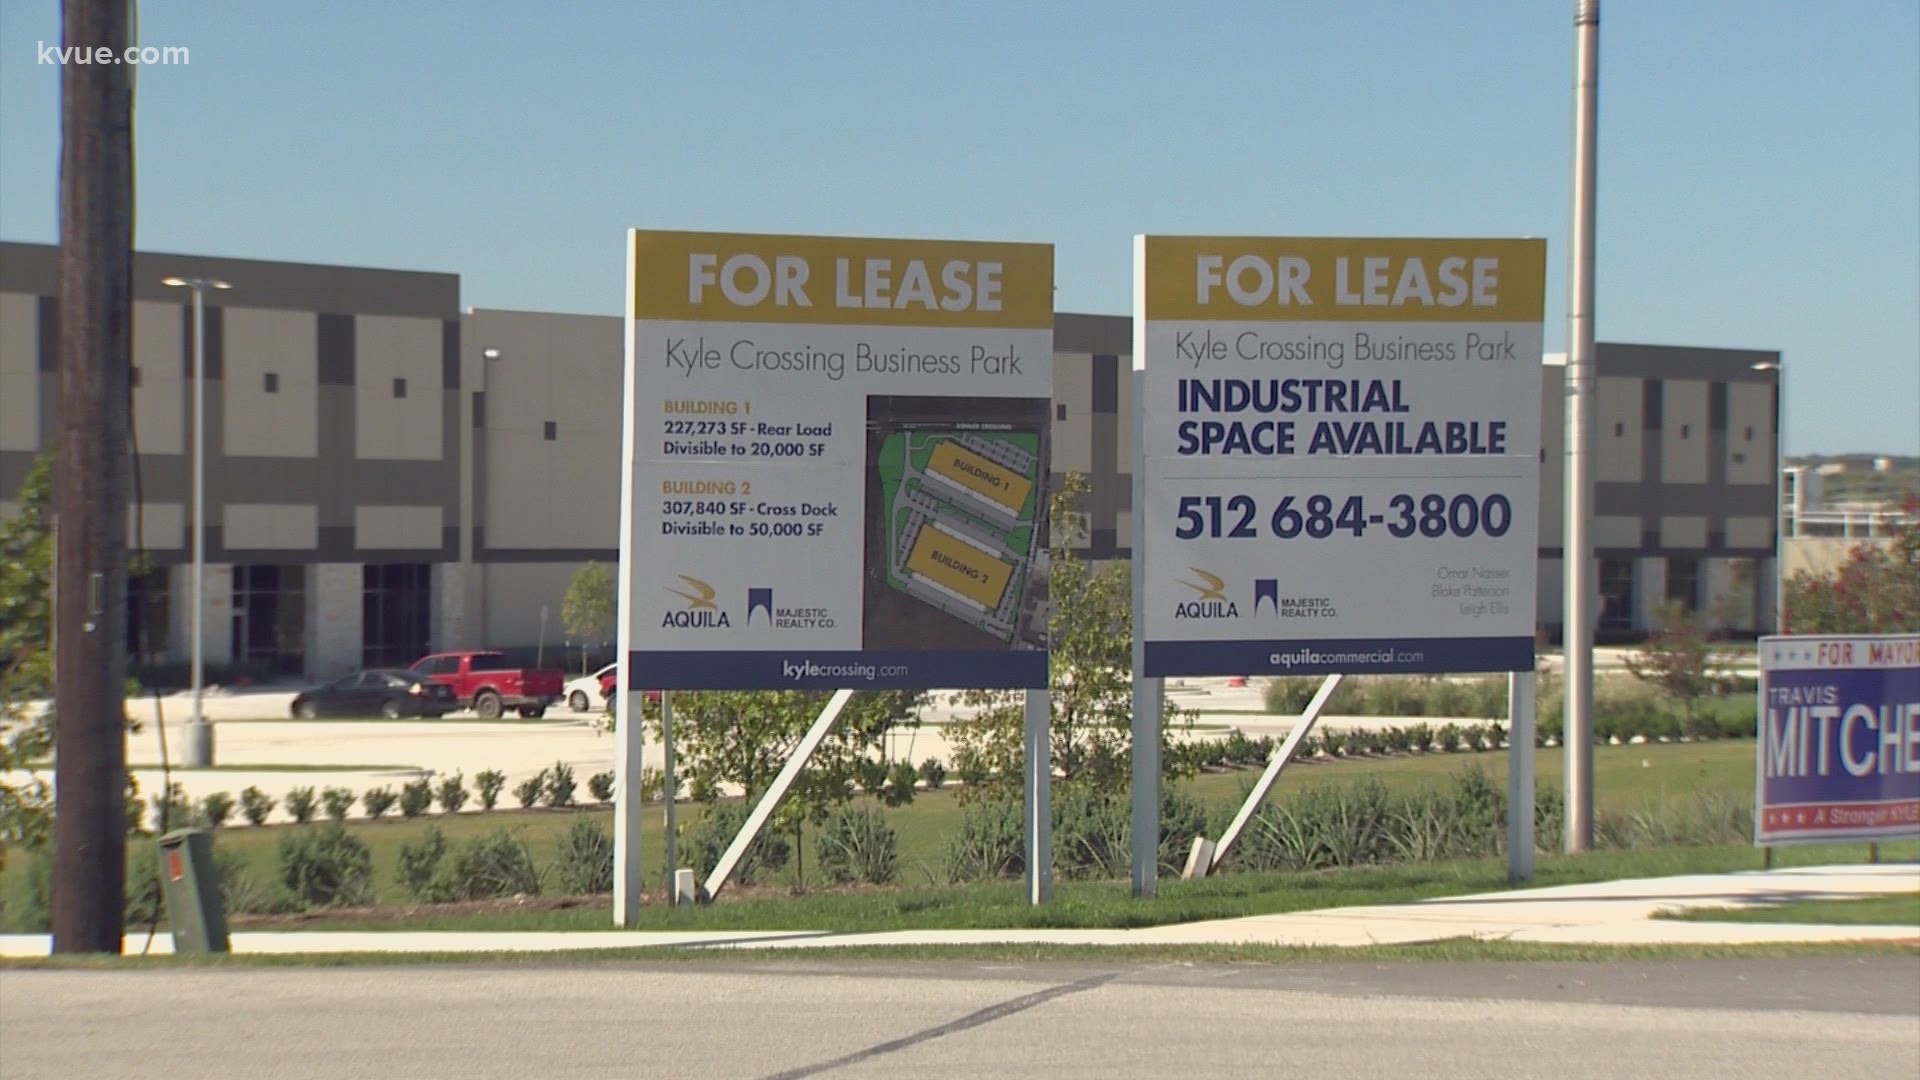 Lowe's signed a lease for a 120,000-square-foot distribution center in Kyle. It will be located in the Plum Creek area.